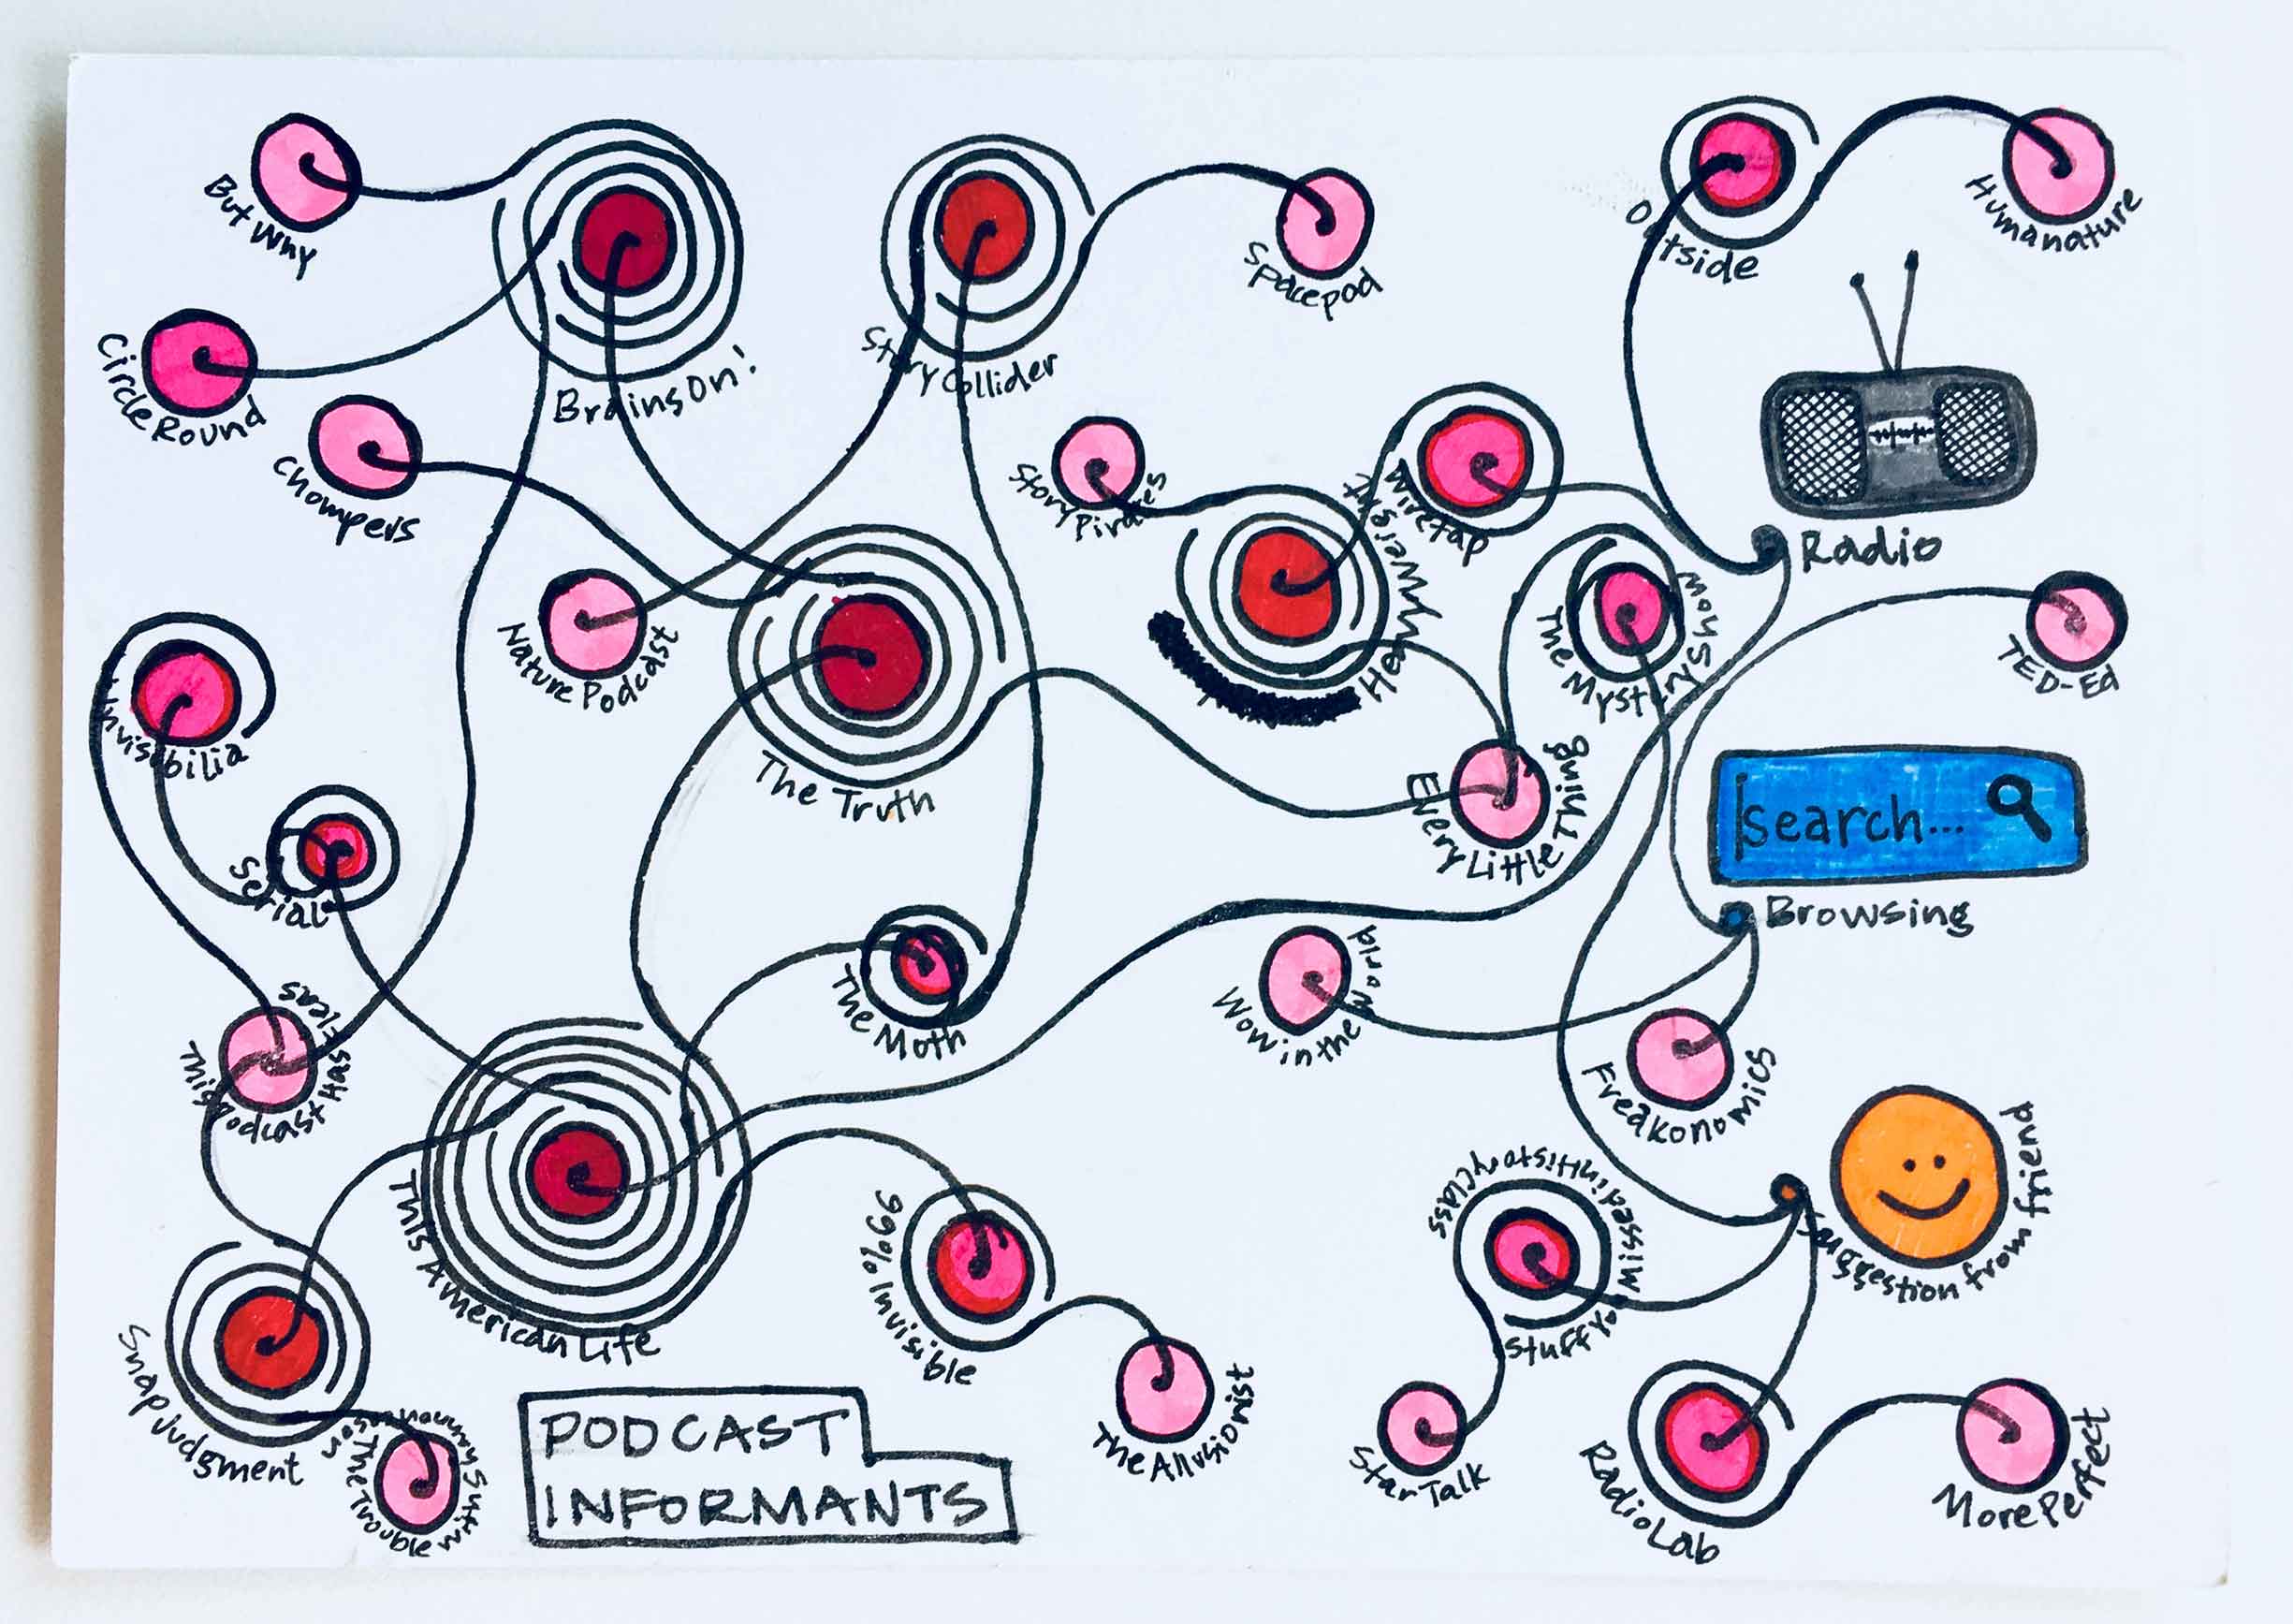 A hand-drawn network diagram connecting nodes that represent podcasts to each other and to radio, search bar, face illustrations.